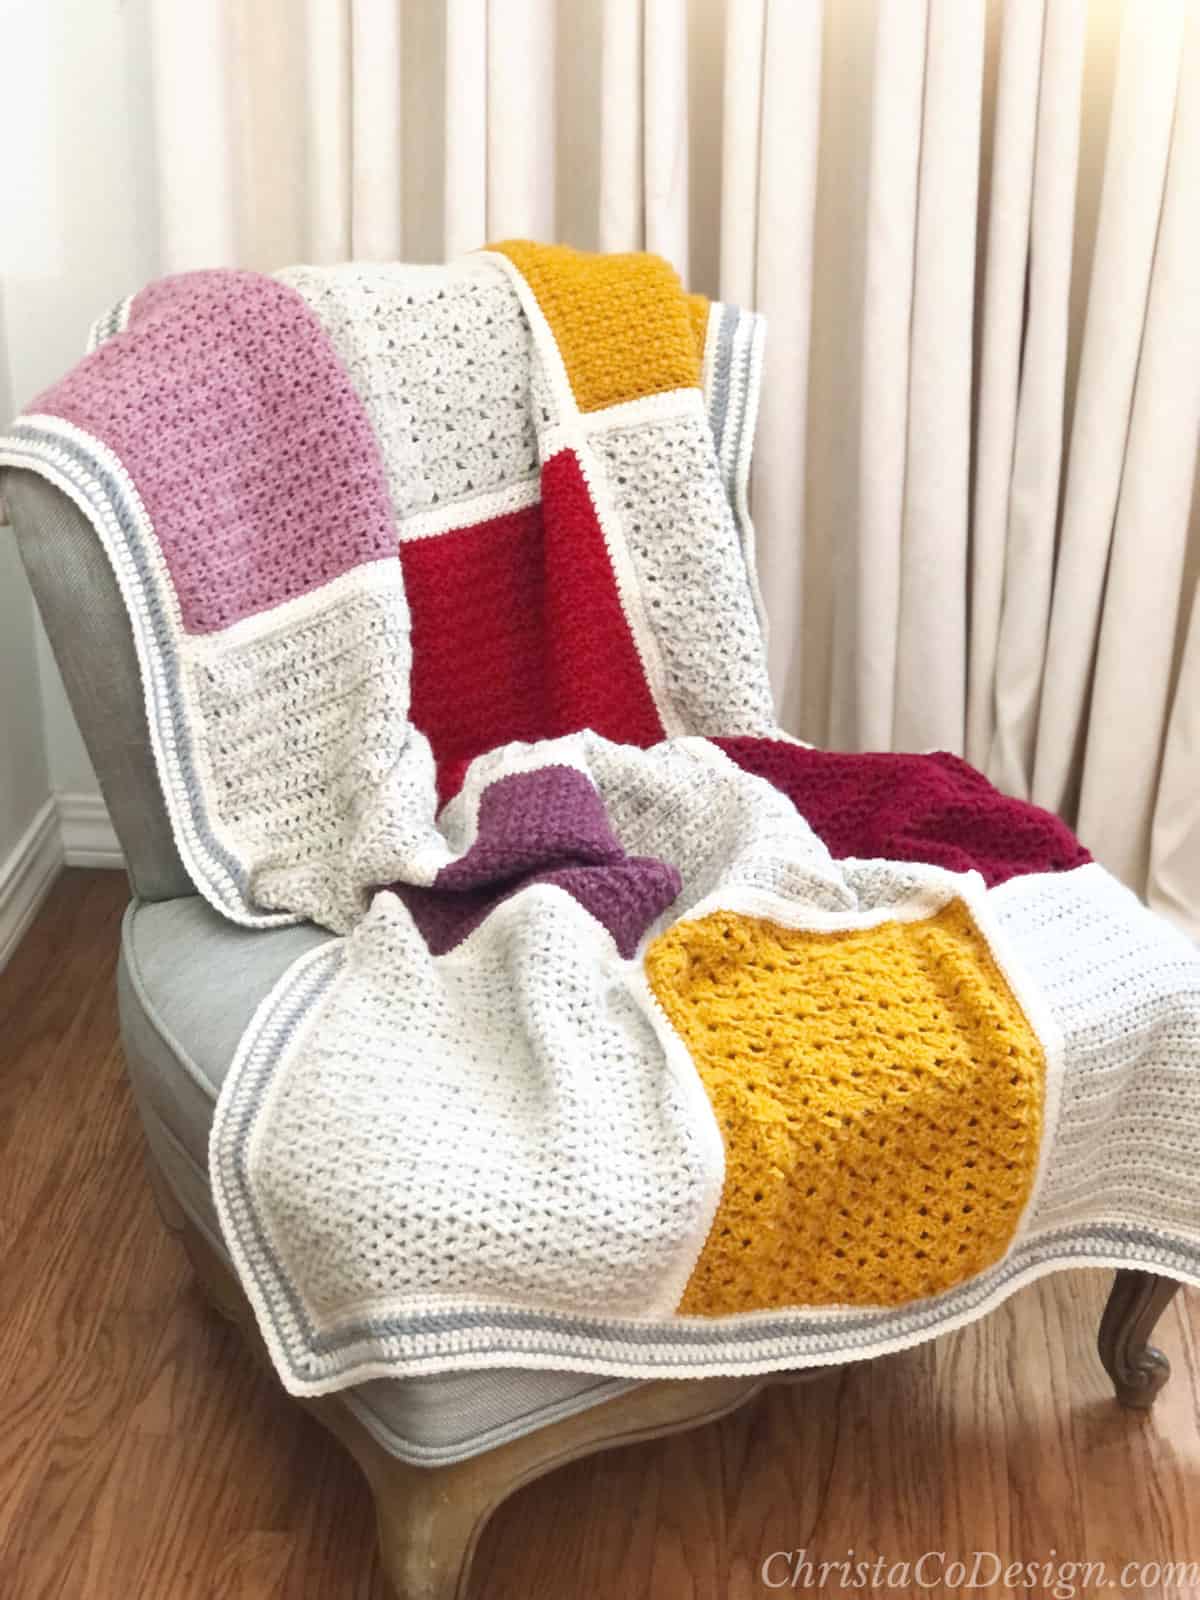 Patchwork crochet blanket in pink, red, gold and cream draped over chair.